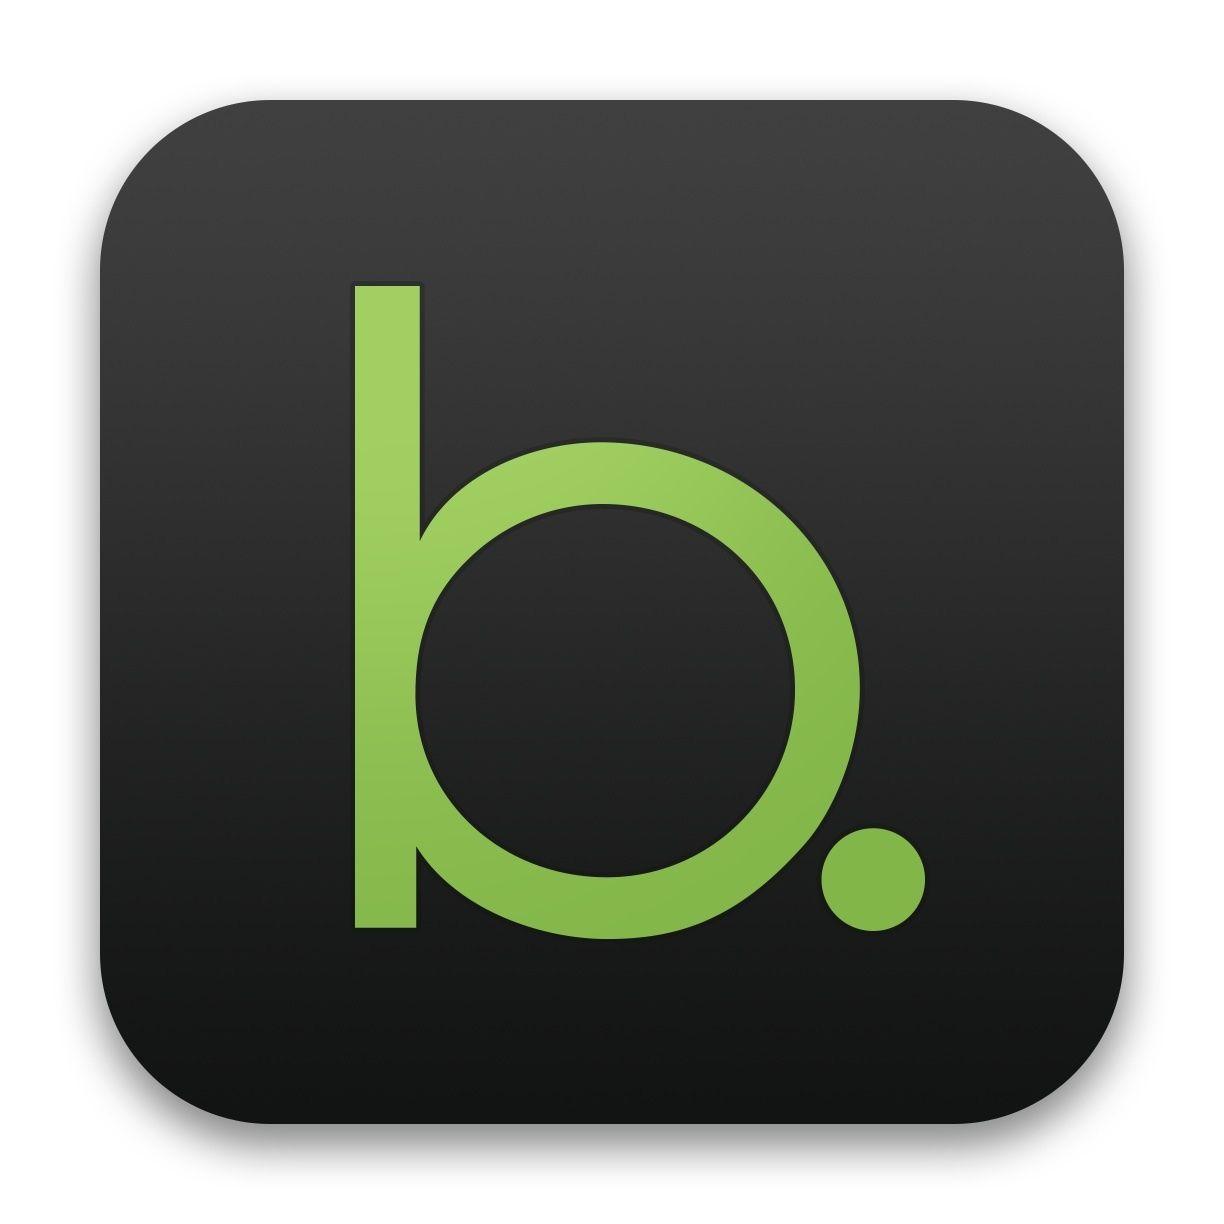 Groupon App Logo - Groupon Expands Point Of Sale Suite With New Breadcrumb IPad App